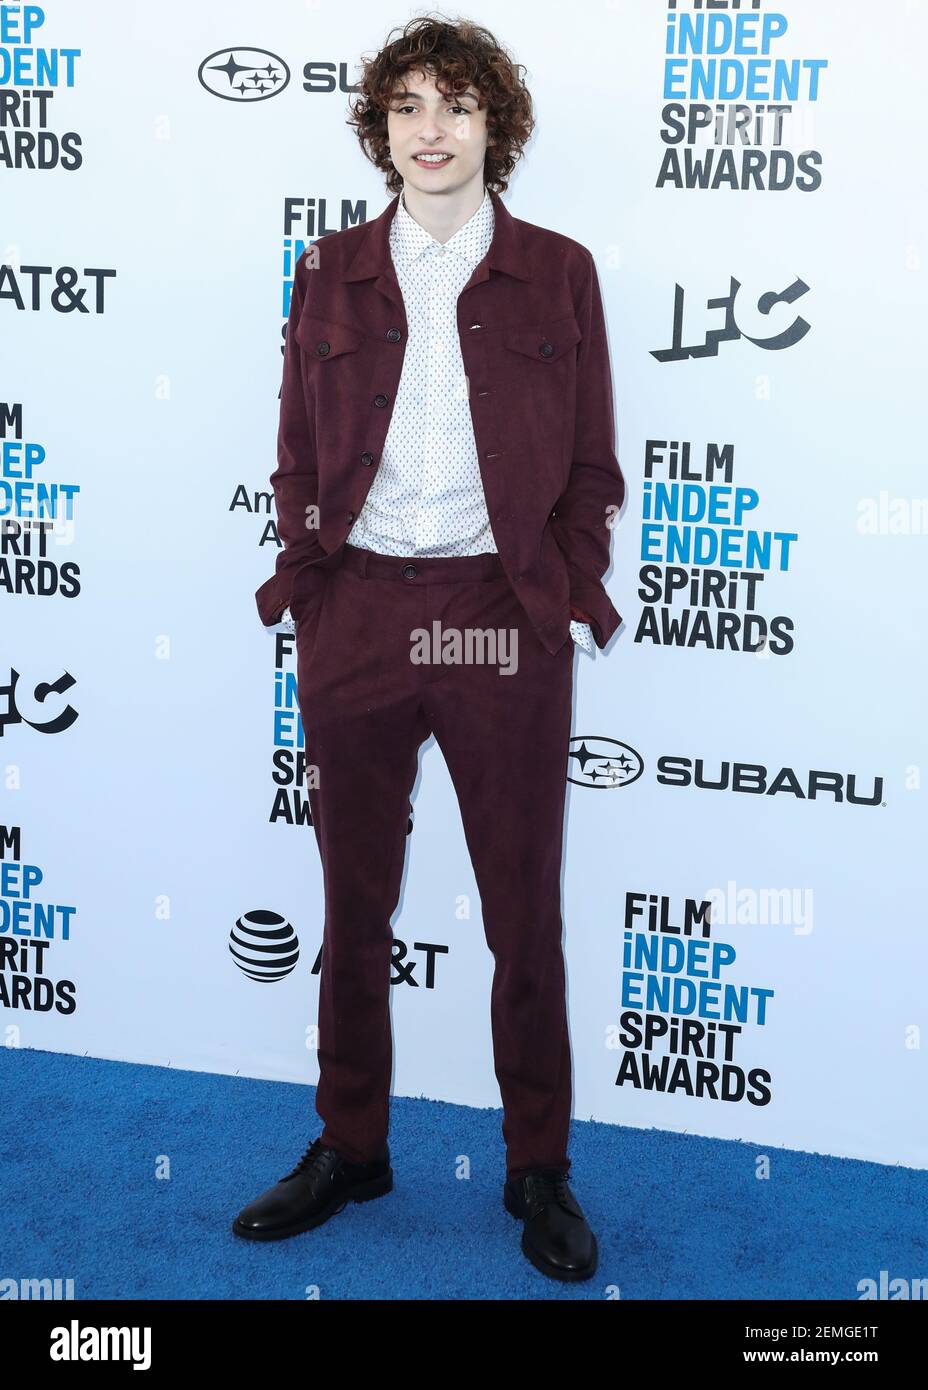 SANTA MONICA, LOS ANGELES, CA, USA - FEBRUARY 23: Actor Finn Wolfhard  wearing a Darkoh suit, Etro shirt, and Tod's shoes arrives at the 2019 Film  Independent Spirit Awards held at the